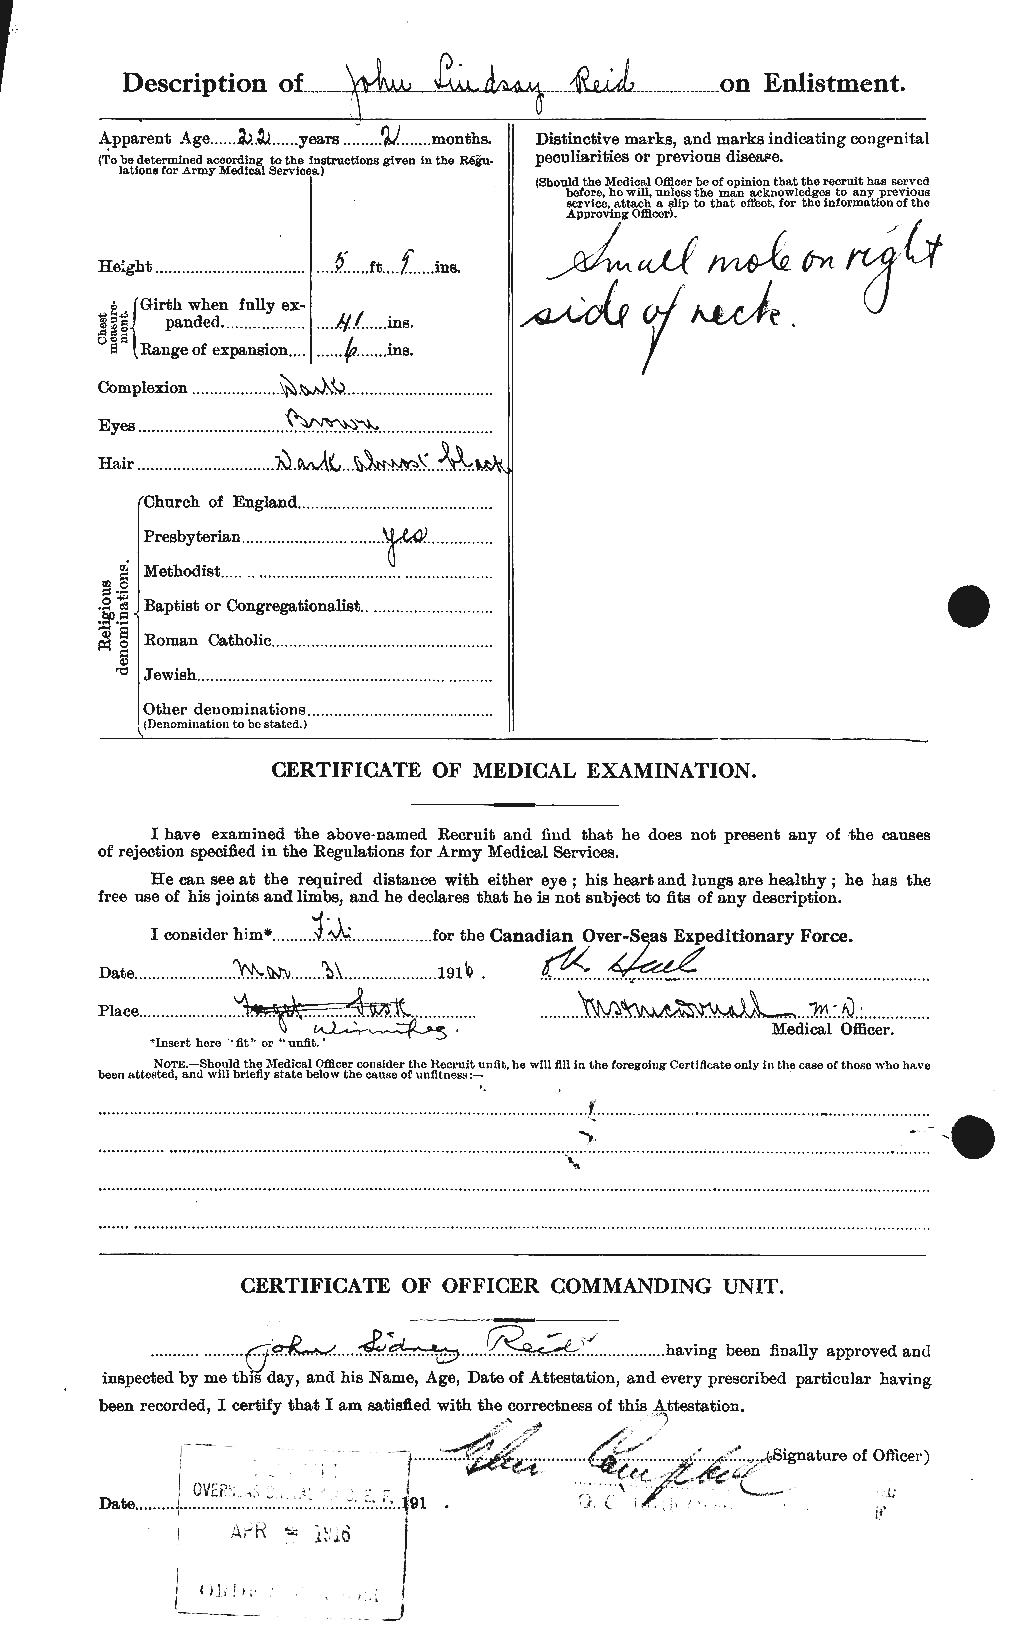 Personnel Records of the First World War - CEF 598853b